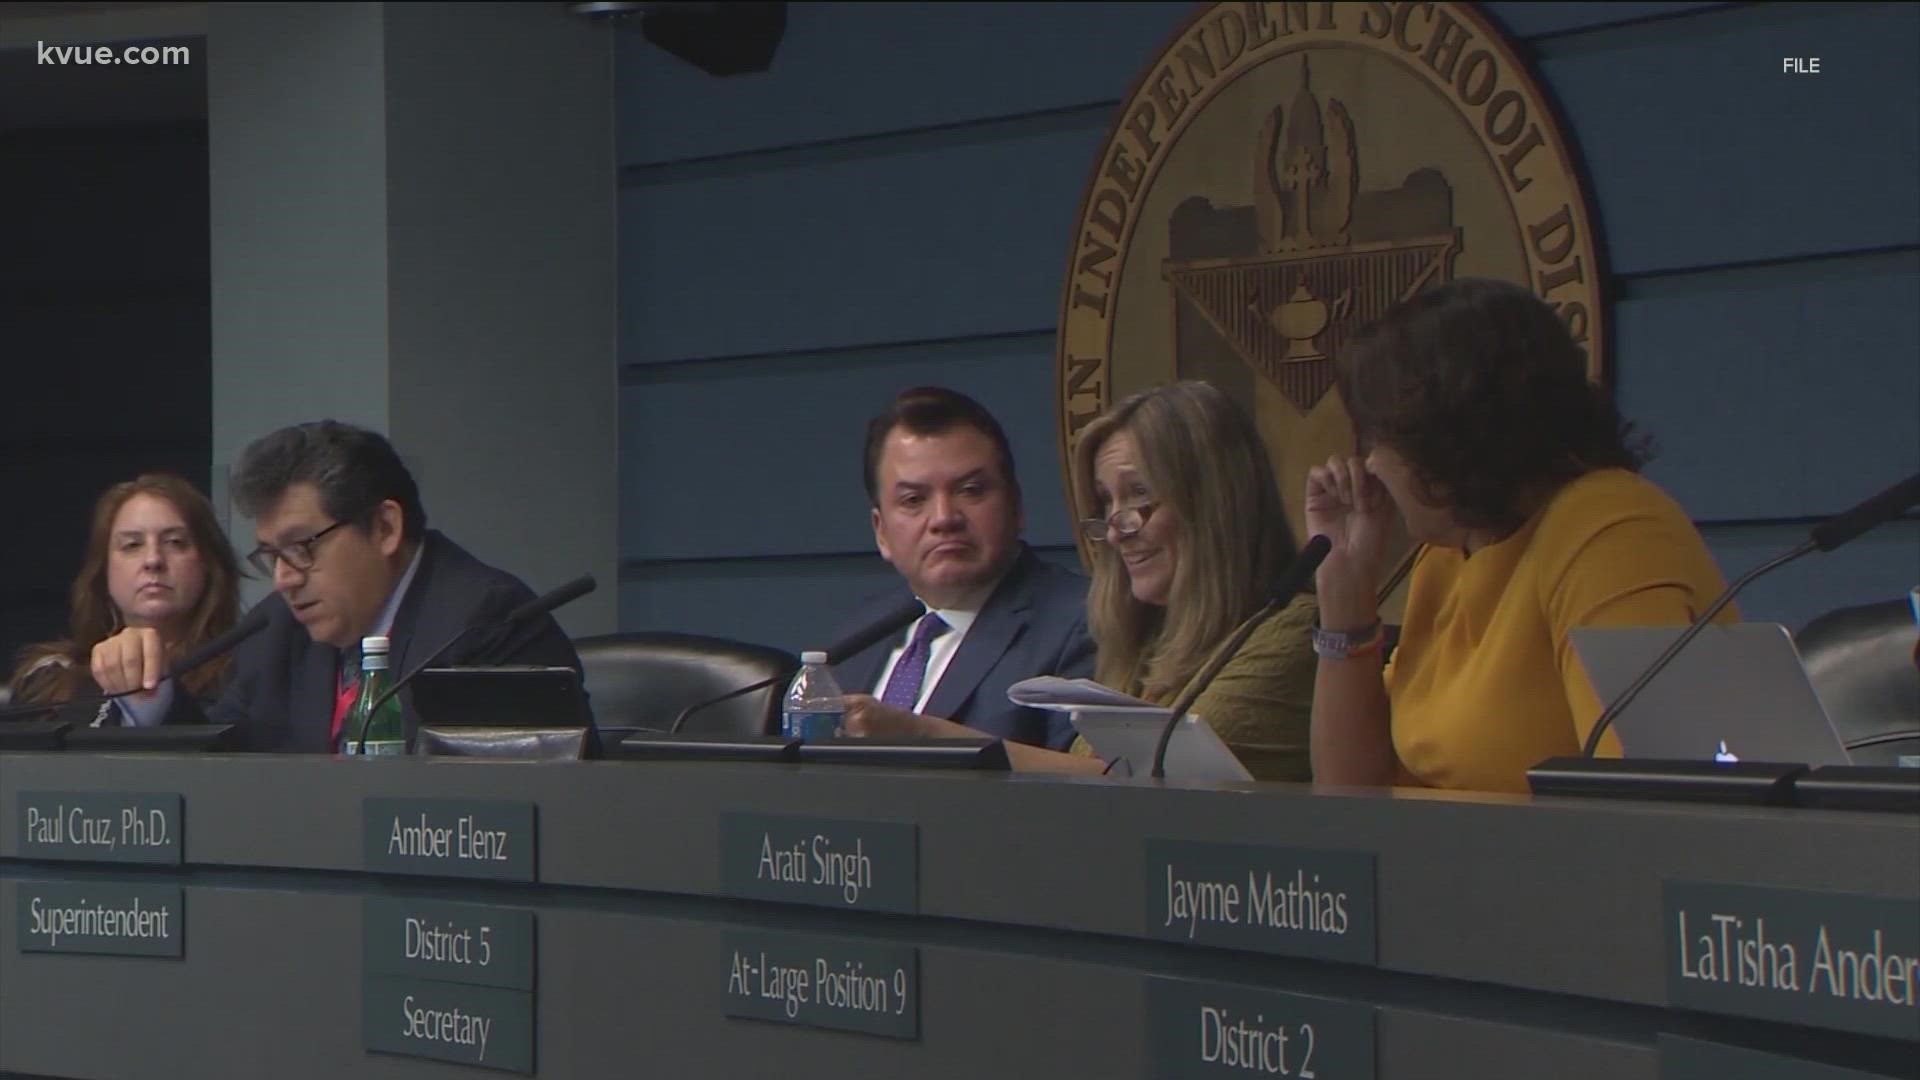 Austin ISD is reopening discussions about what to do with four elementary school campuses that were closed in recent years.